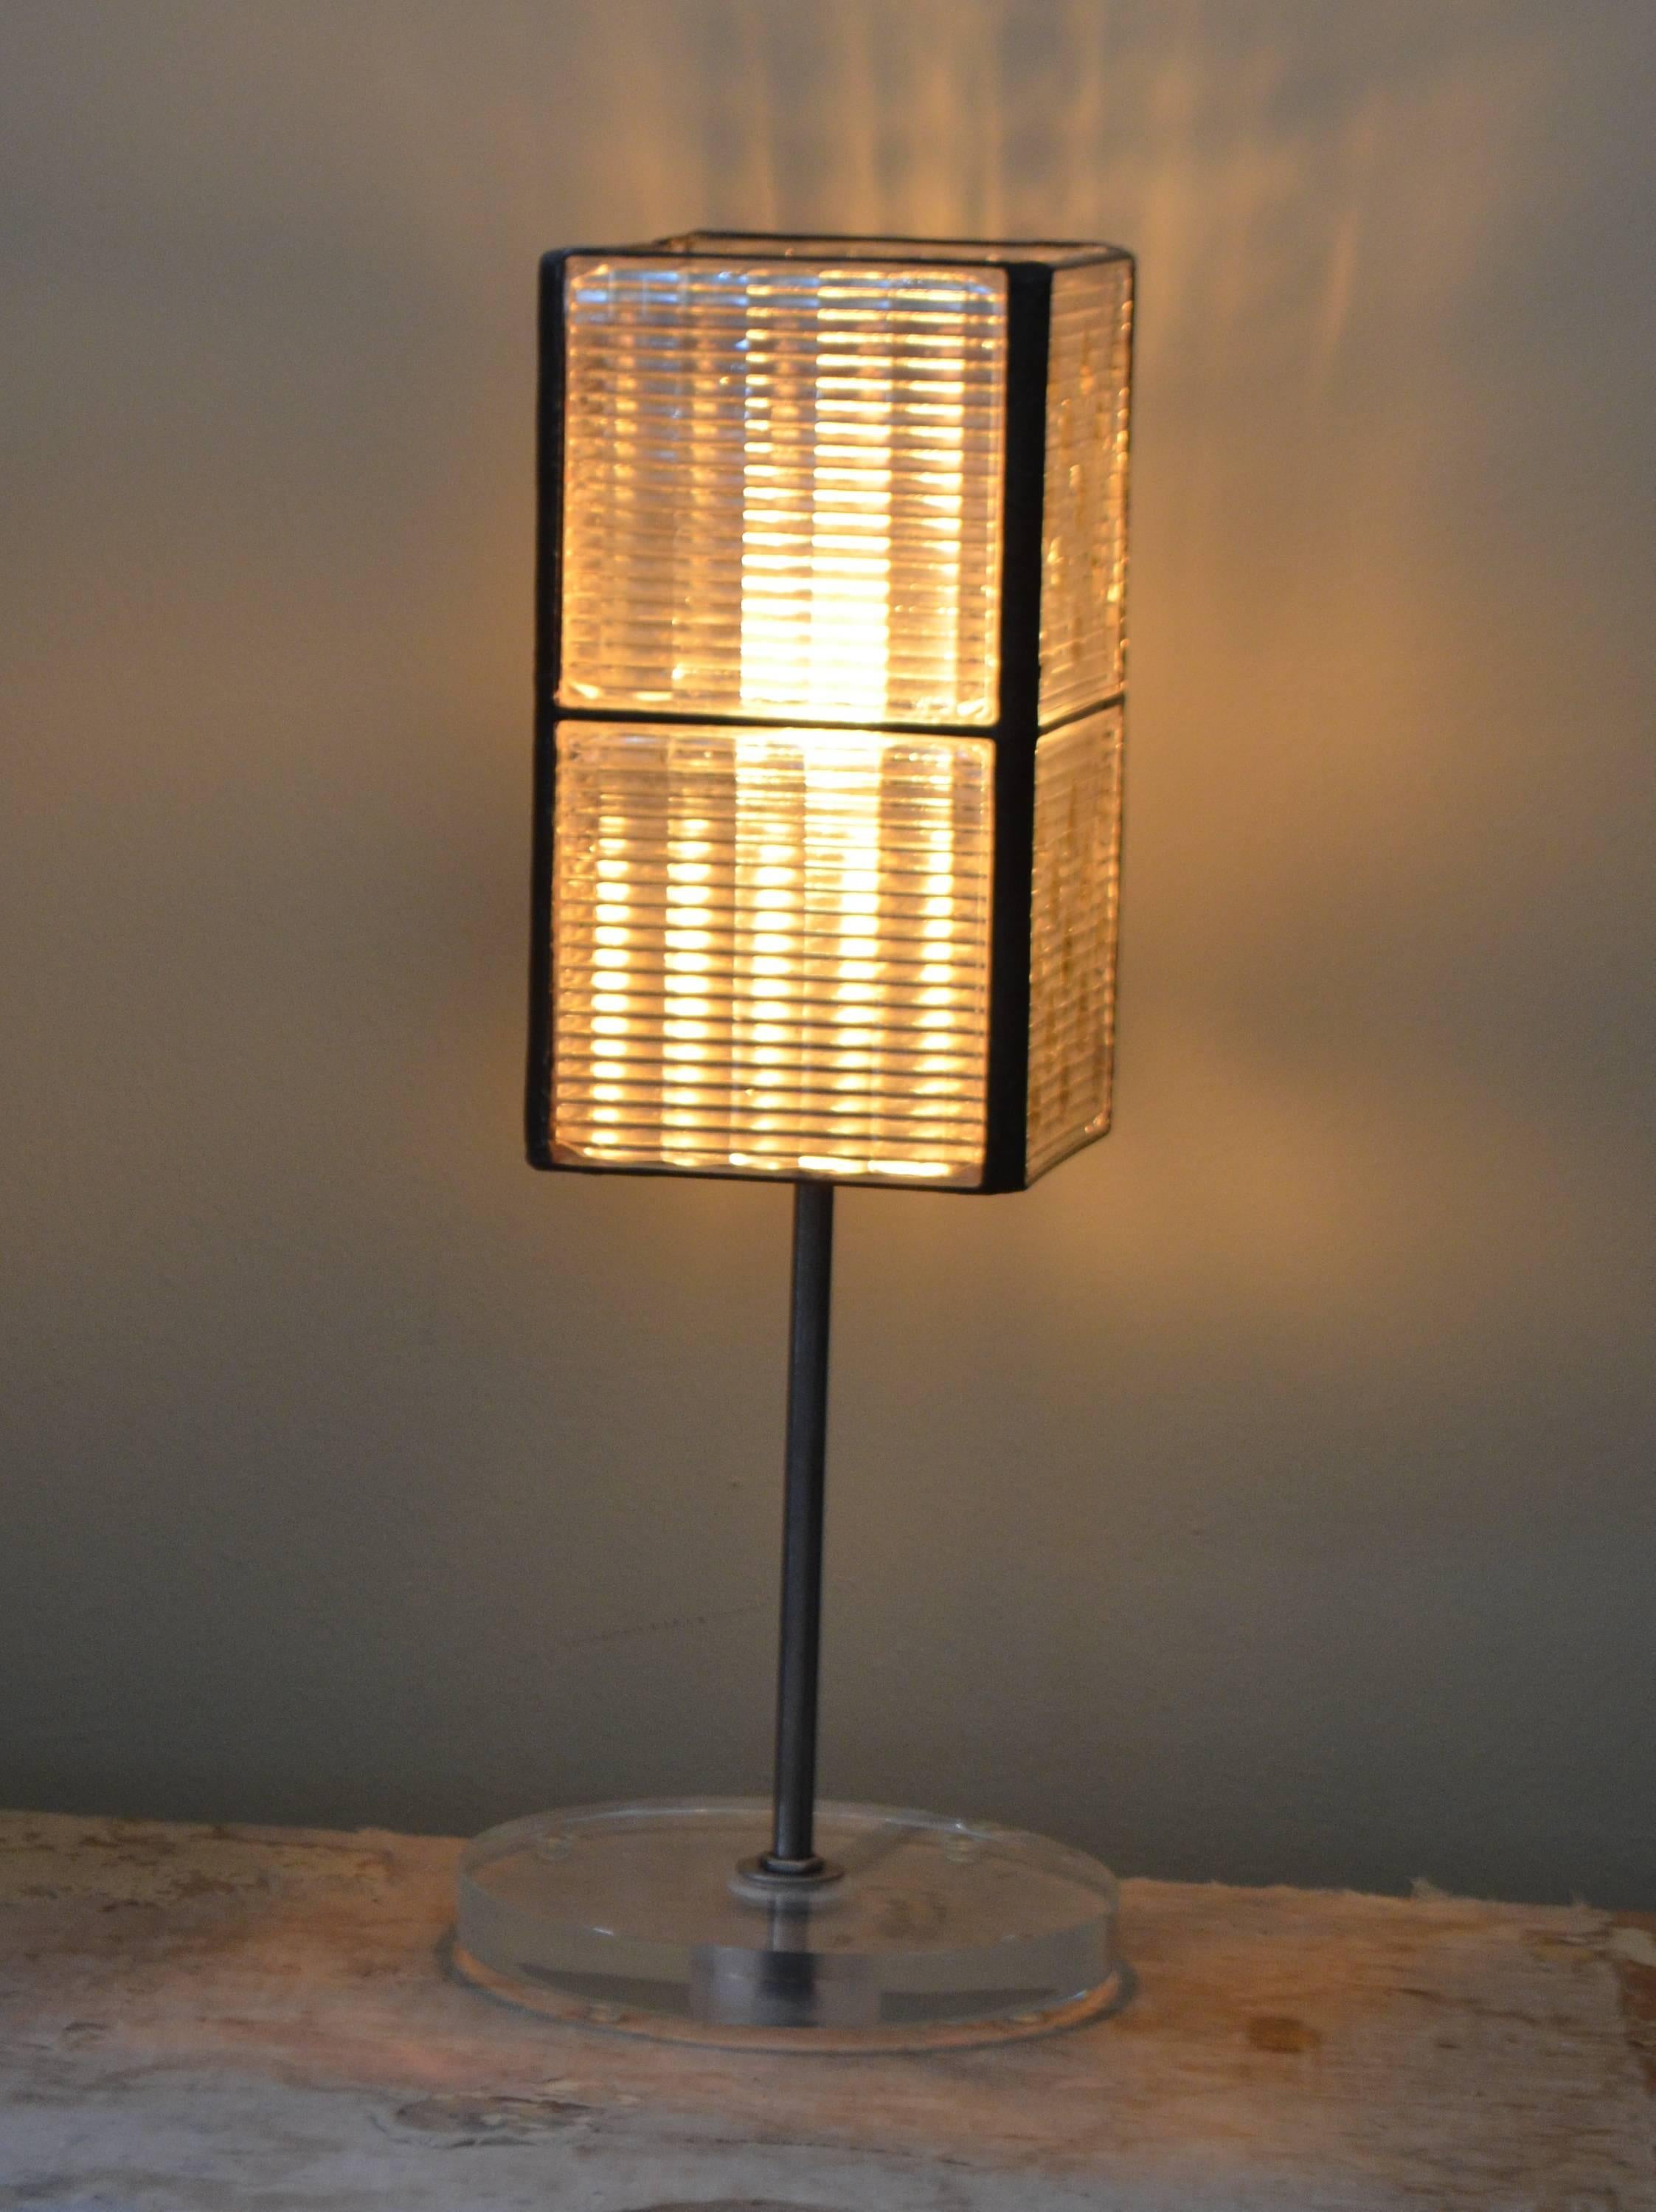 Table lamp has been created from eight glass Luxfer tiles of the teardrop design. At the turn of the 20th century, before electricity was widespread, glass Luxfer tiles were used in main street storefronts above door and windows as transoms that